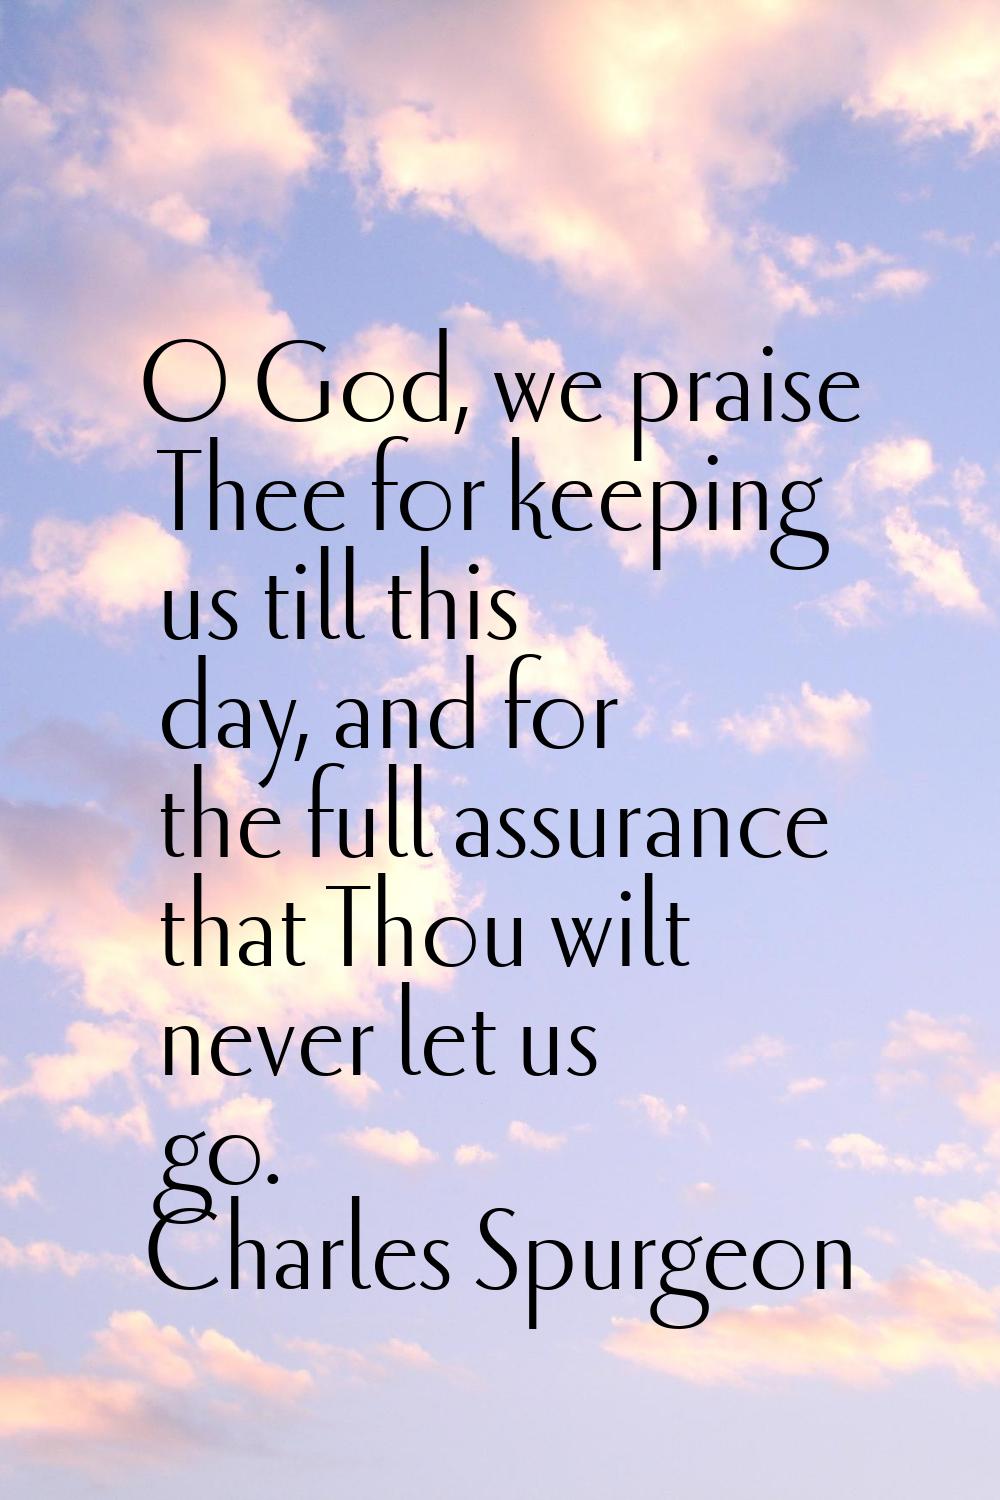 O God, we praise Thee for keeping us till this day, and for the full assurance that Thou wilt never